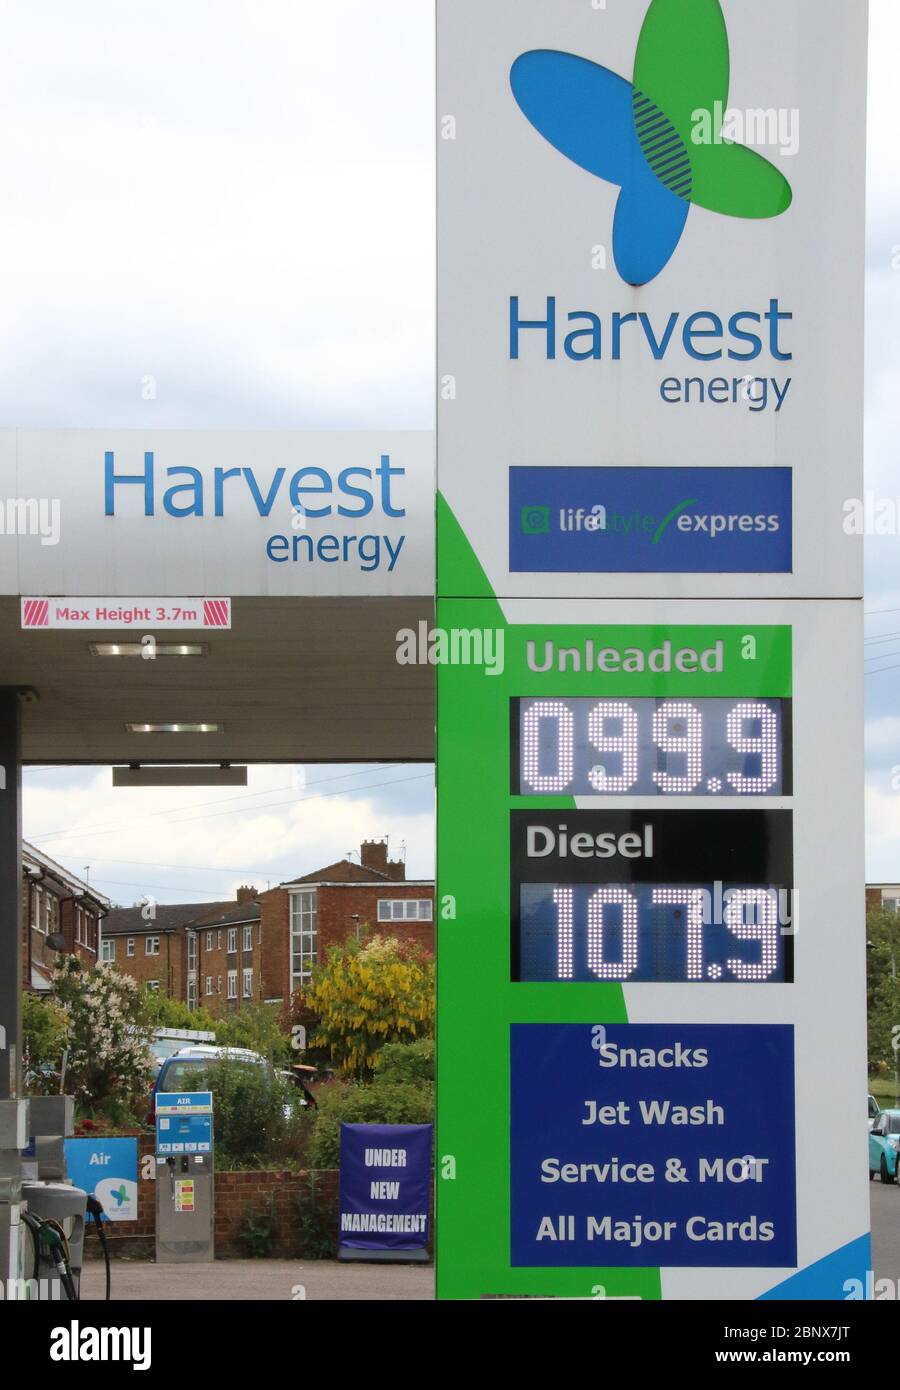 A Harvest Energy petrol station sells unleaded petrol at 99.9p per litre, the first time since 2016 petrol has been sold below £1 per litre.The global oil market crash triggered by the coronavirus lockdown has seen the crude oil price plummet to a near 20-year low. Now, led by UK Supermarket chains, Unleaded petrol is now on sale throughout the country at below £1 per litre. Stock Photo